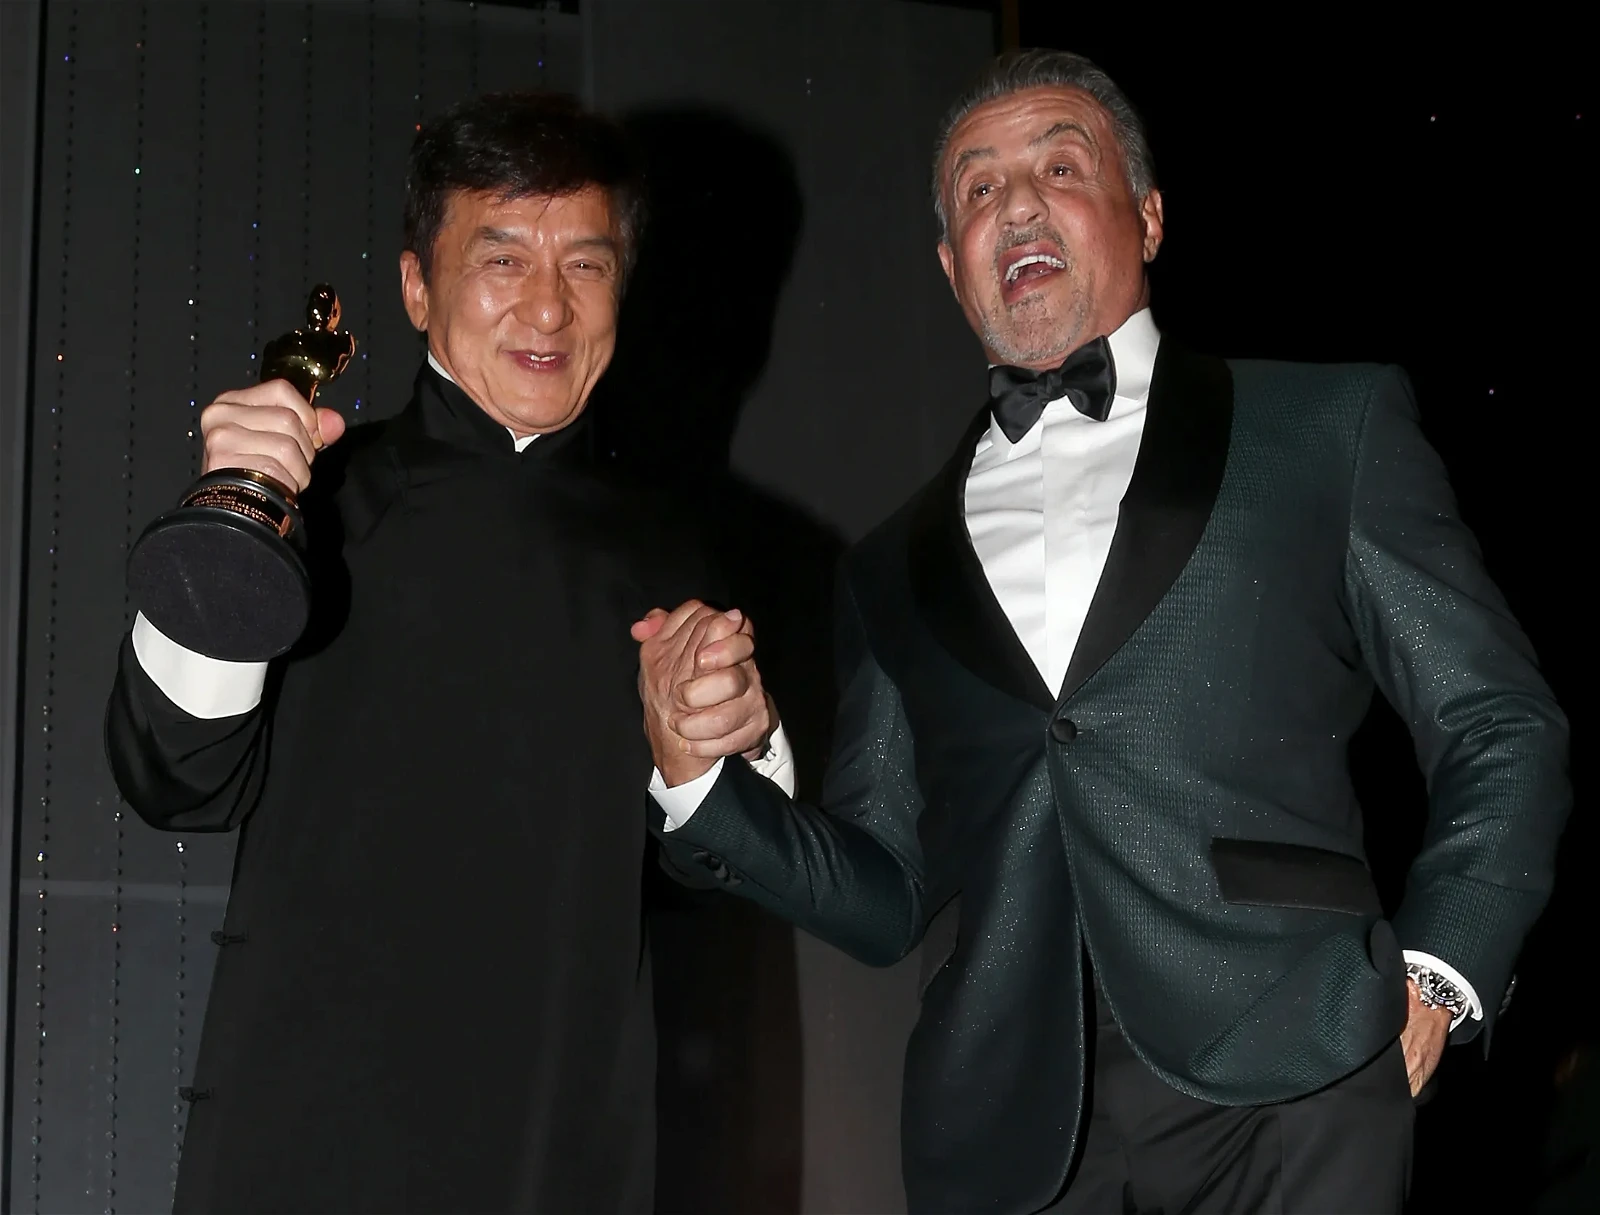 Jackie Chan and Sylvester Stallone and good friends in real life.